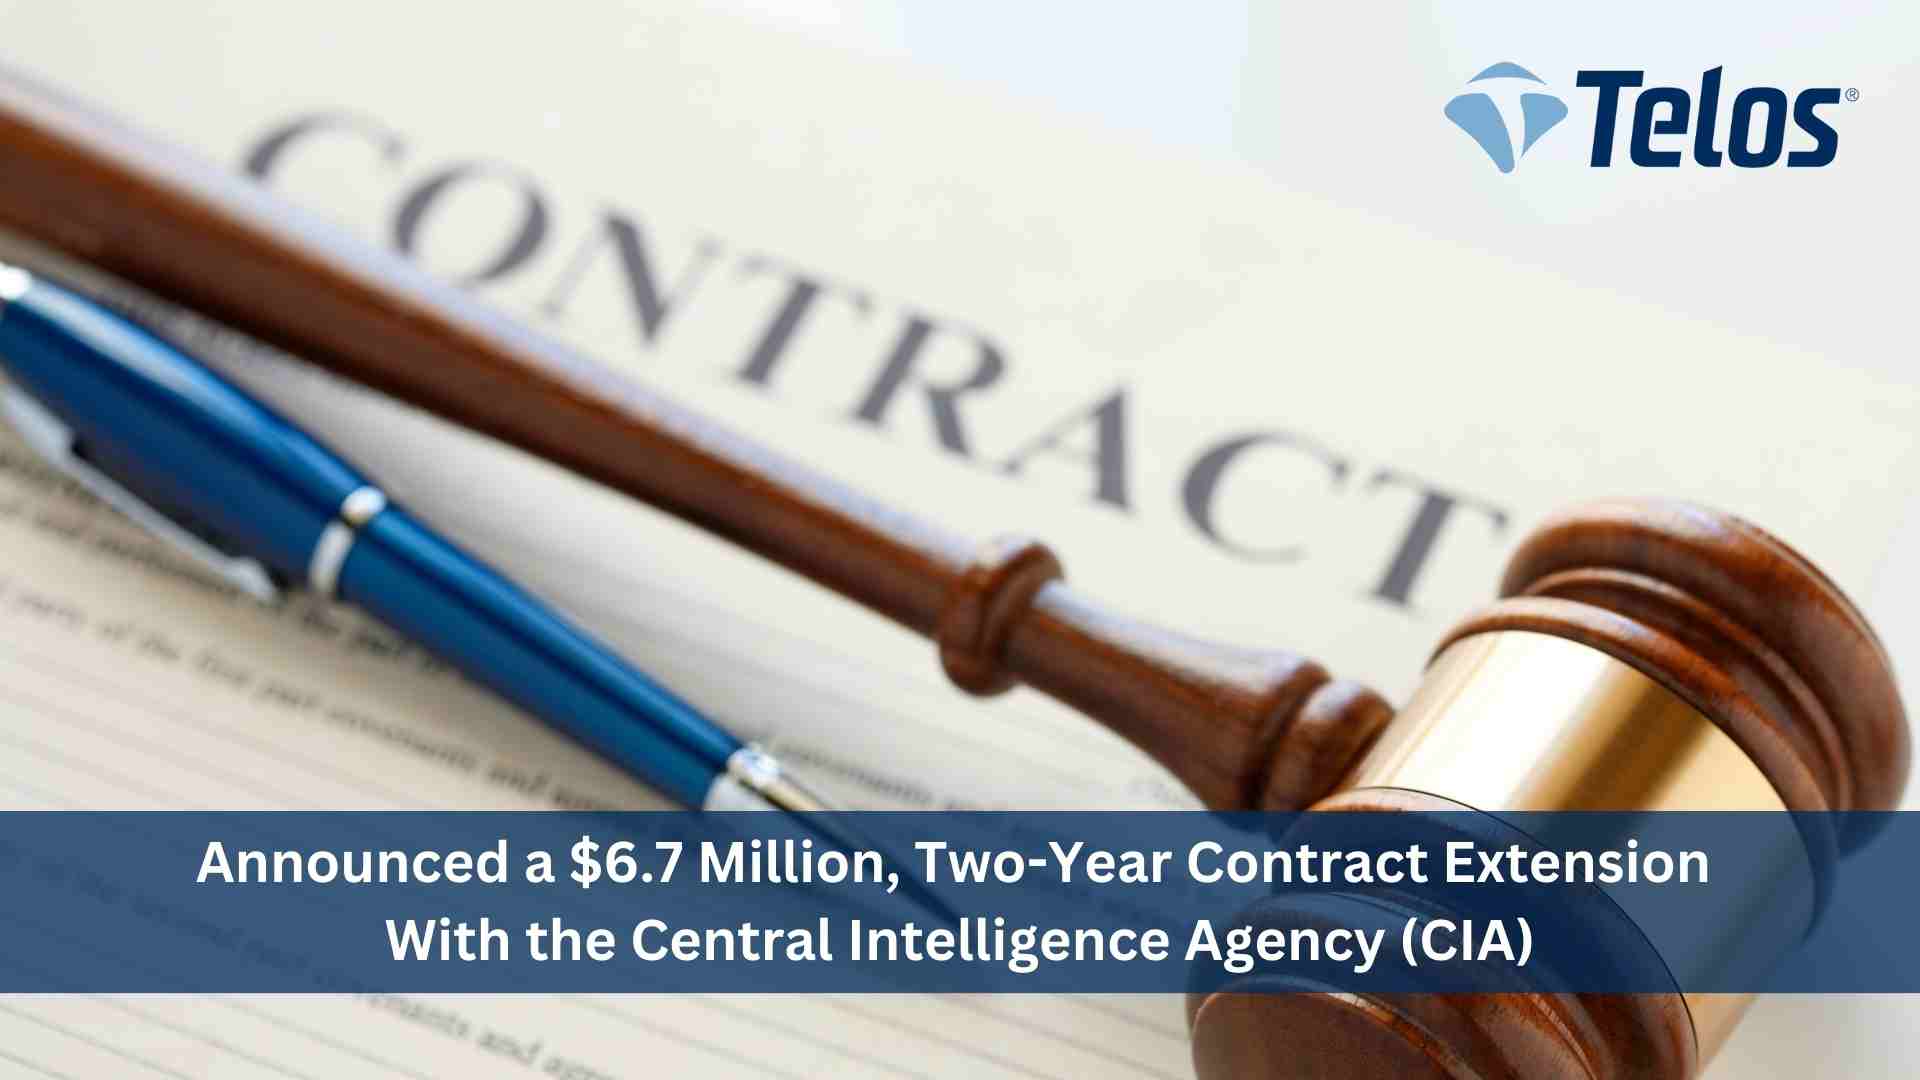 Telos Corporation Awarded Contract Extension with Central Intelligence Agency